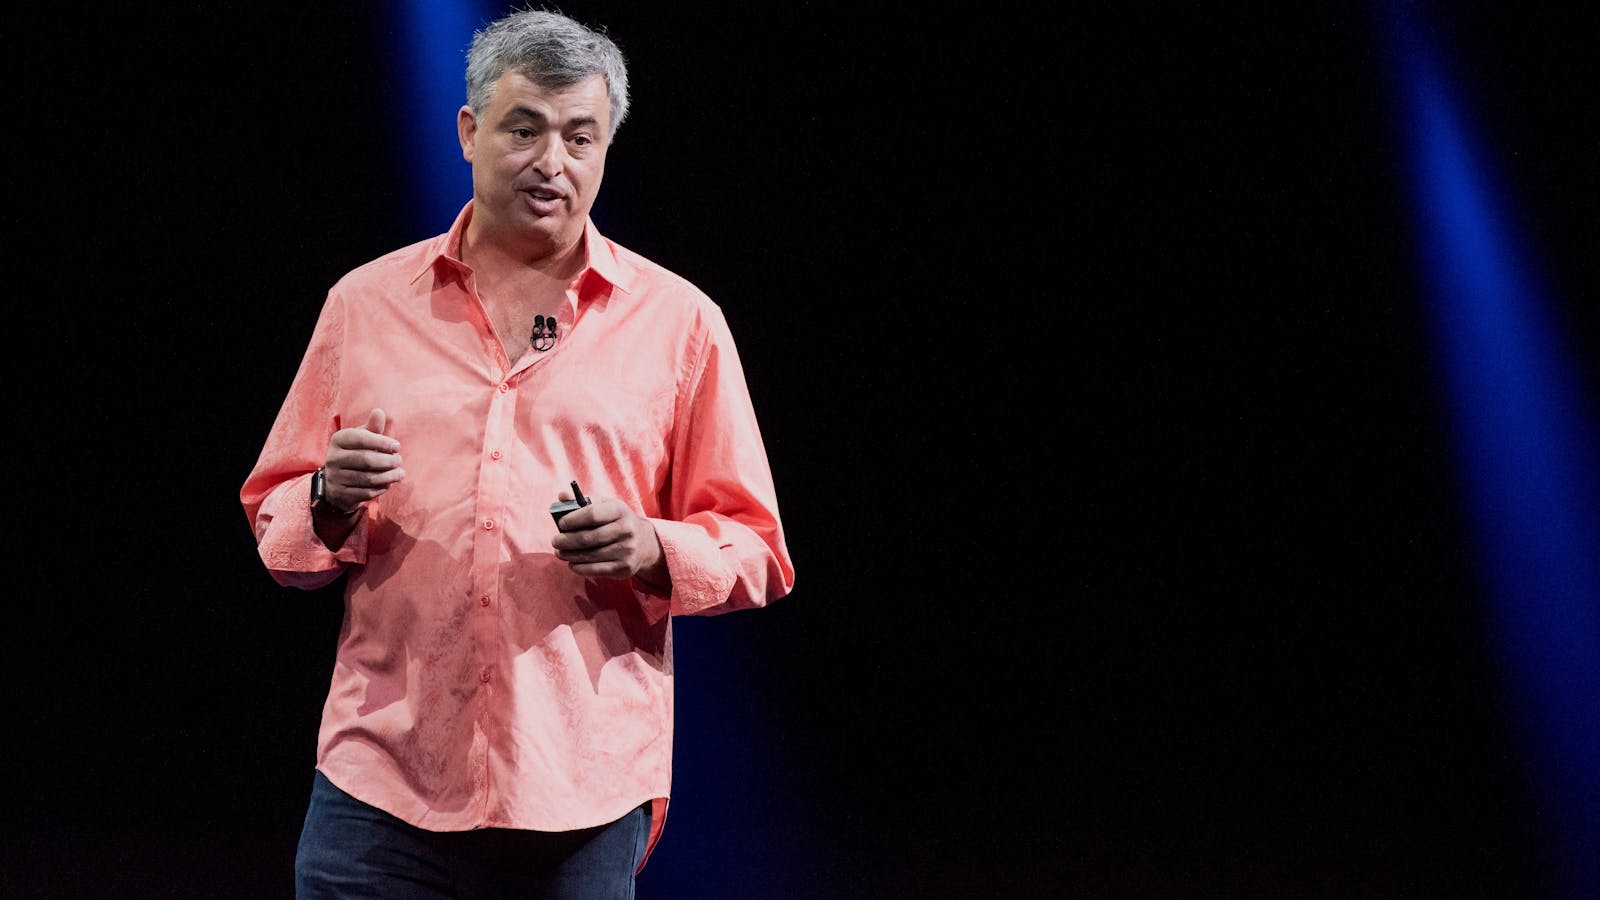 Eddy Cue. Photo by Bloomberg.